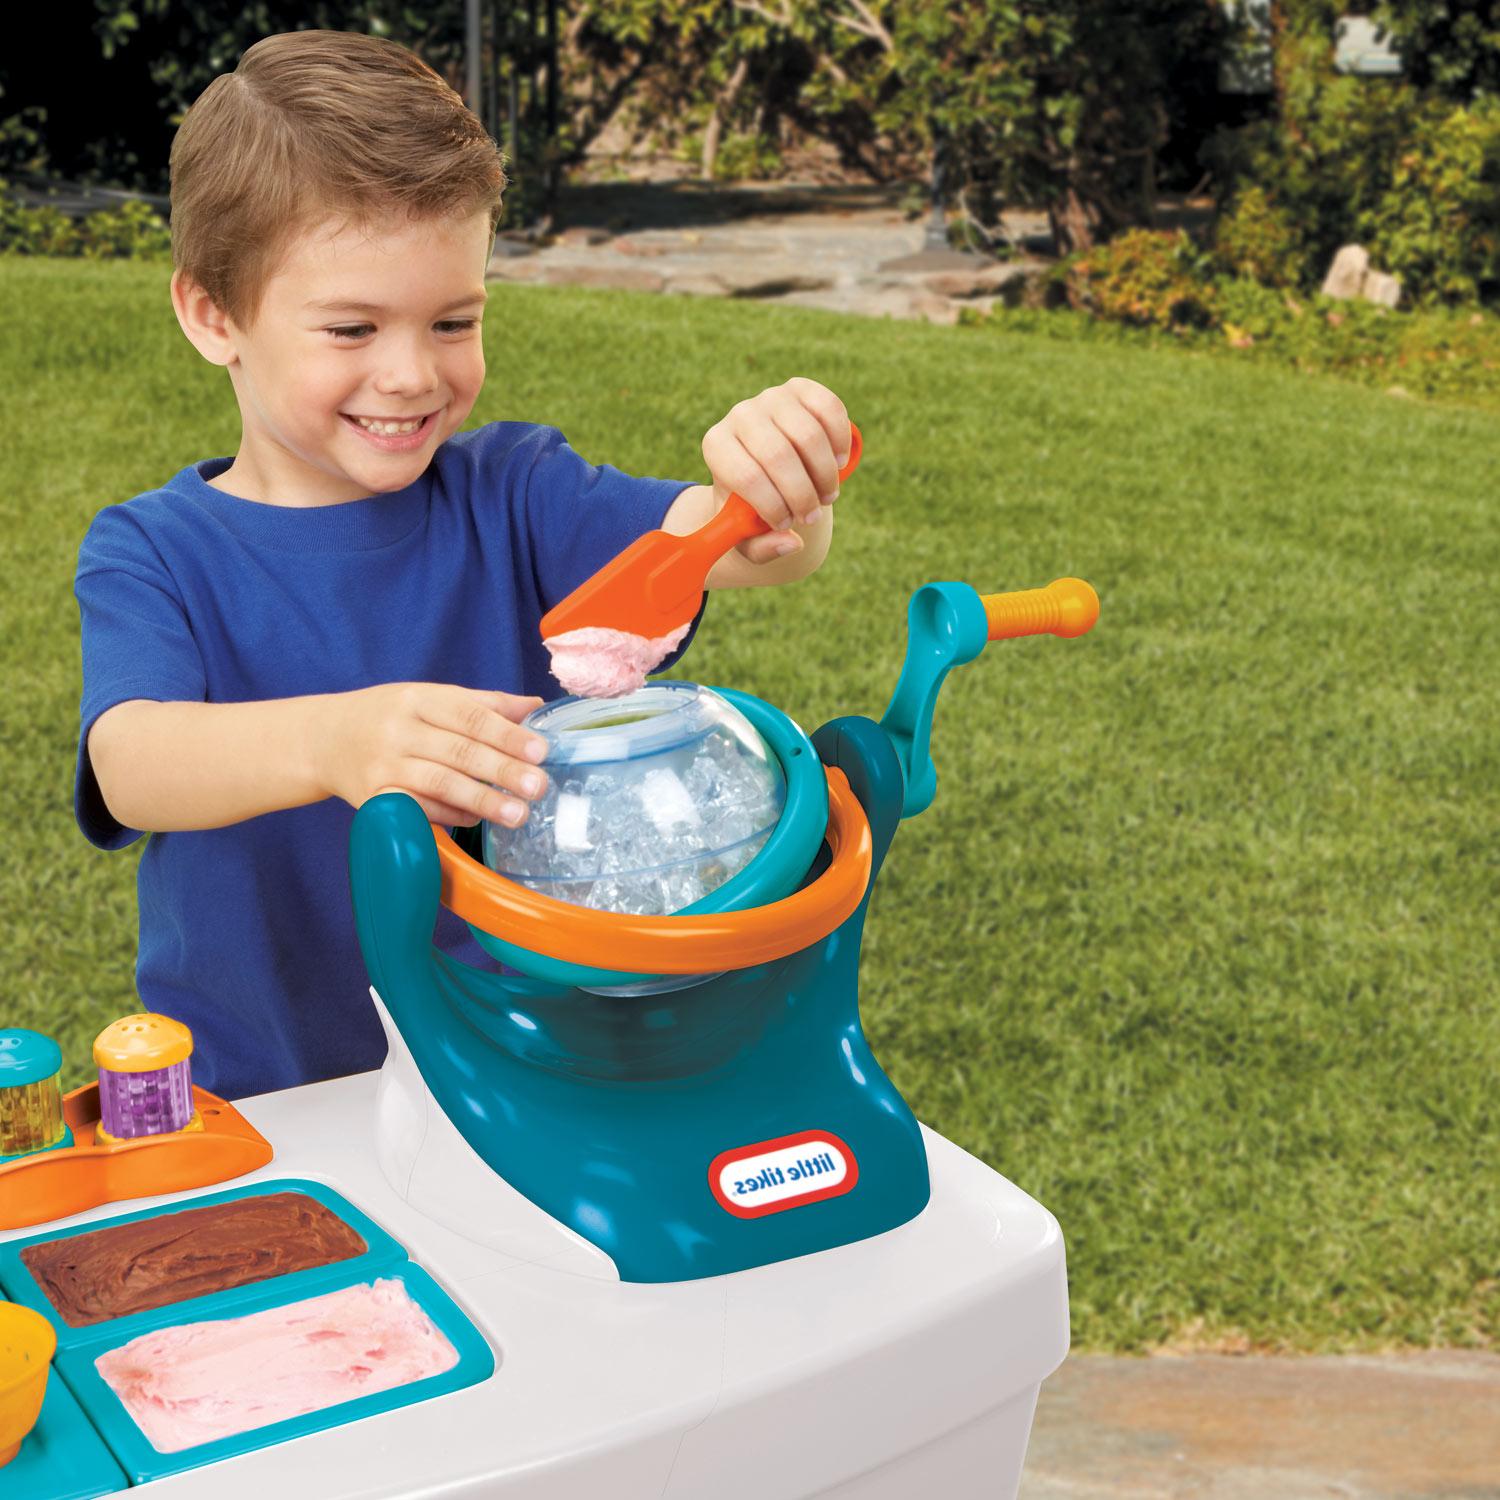 Now Make Real Ice Cream at Home  Little Tikes – Official Little Tikes  Website